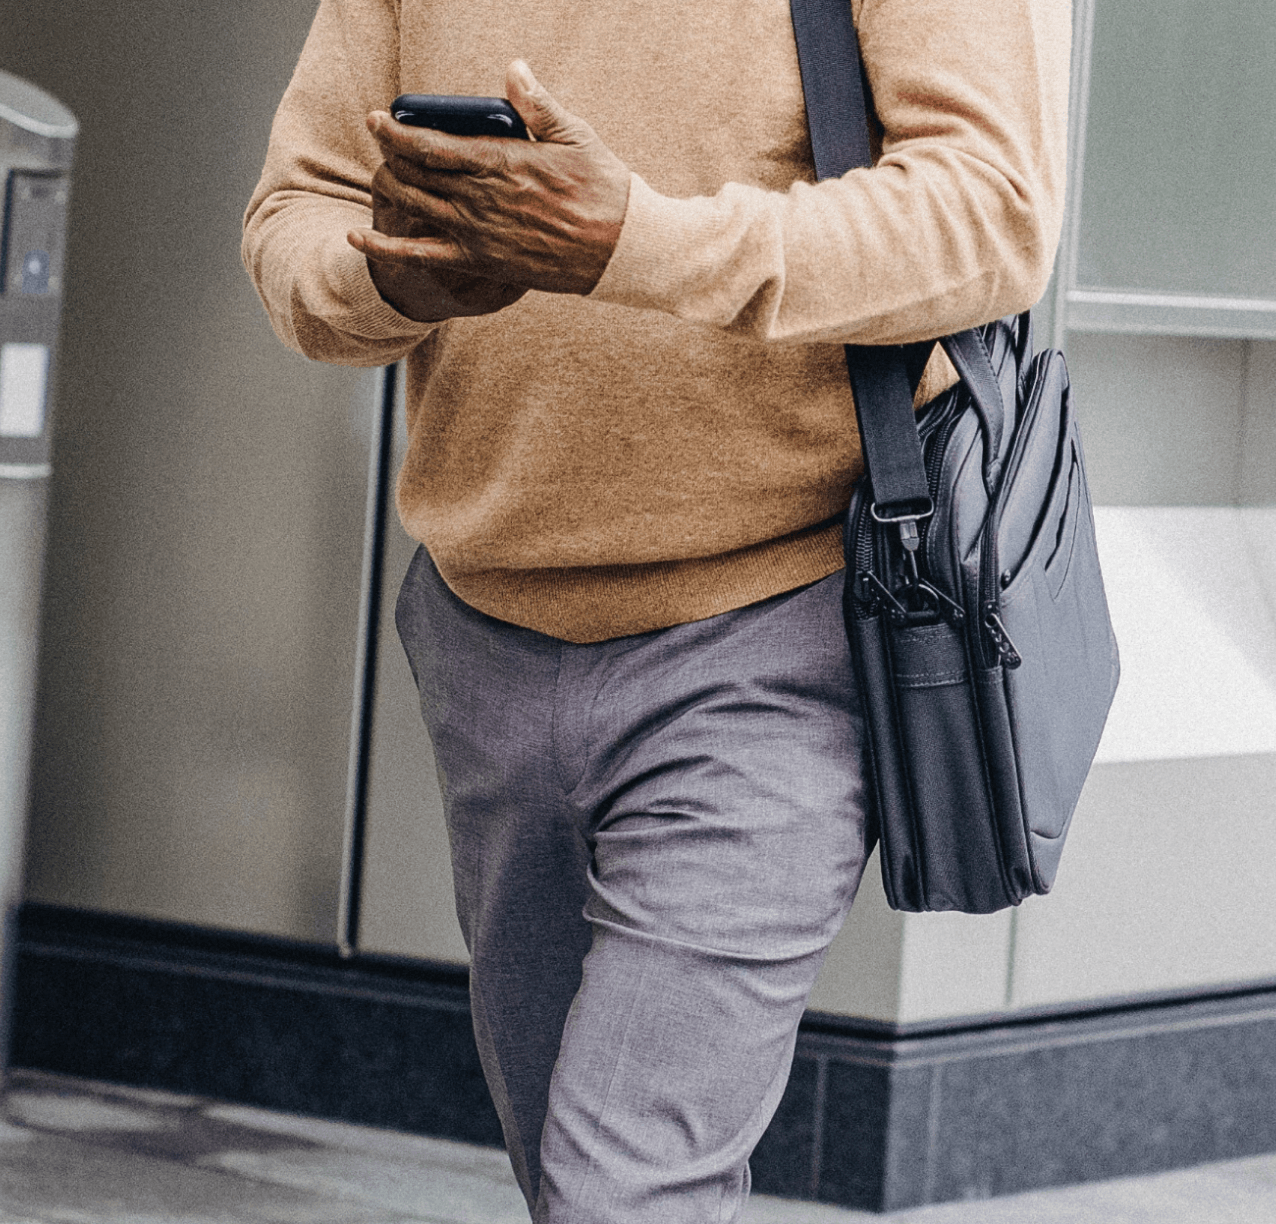 Business man walking with phone